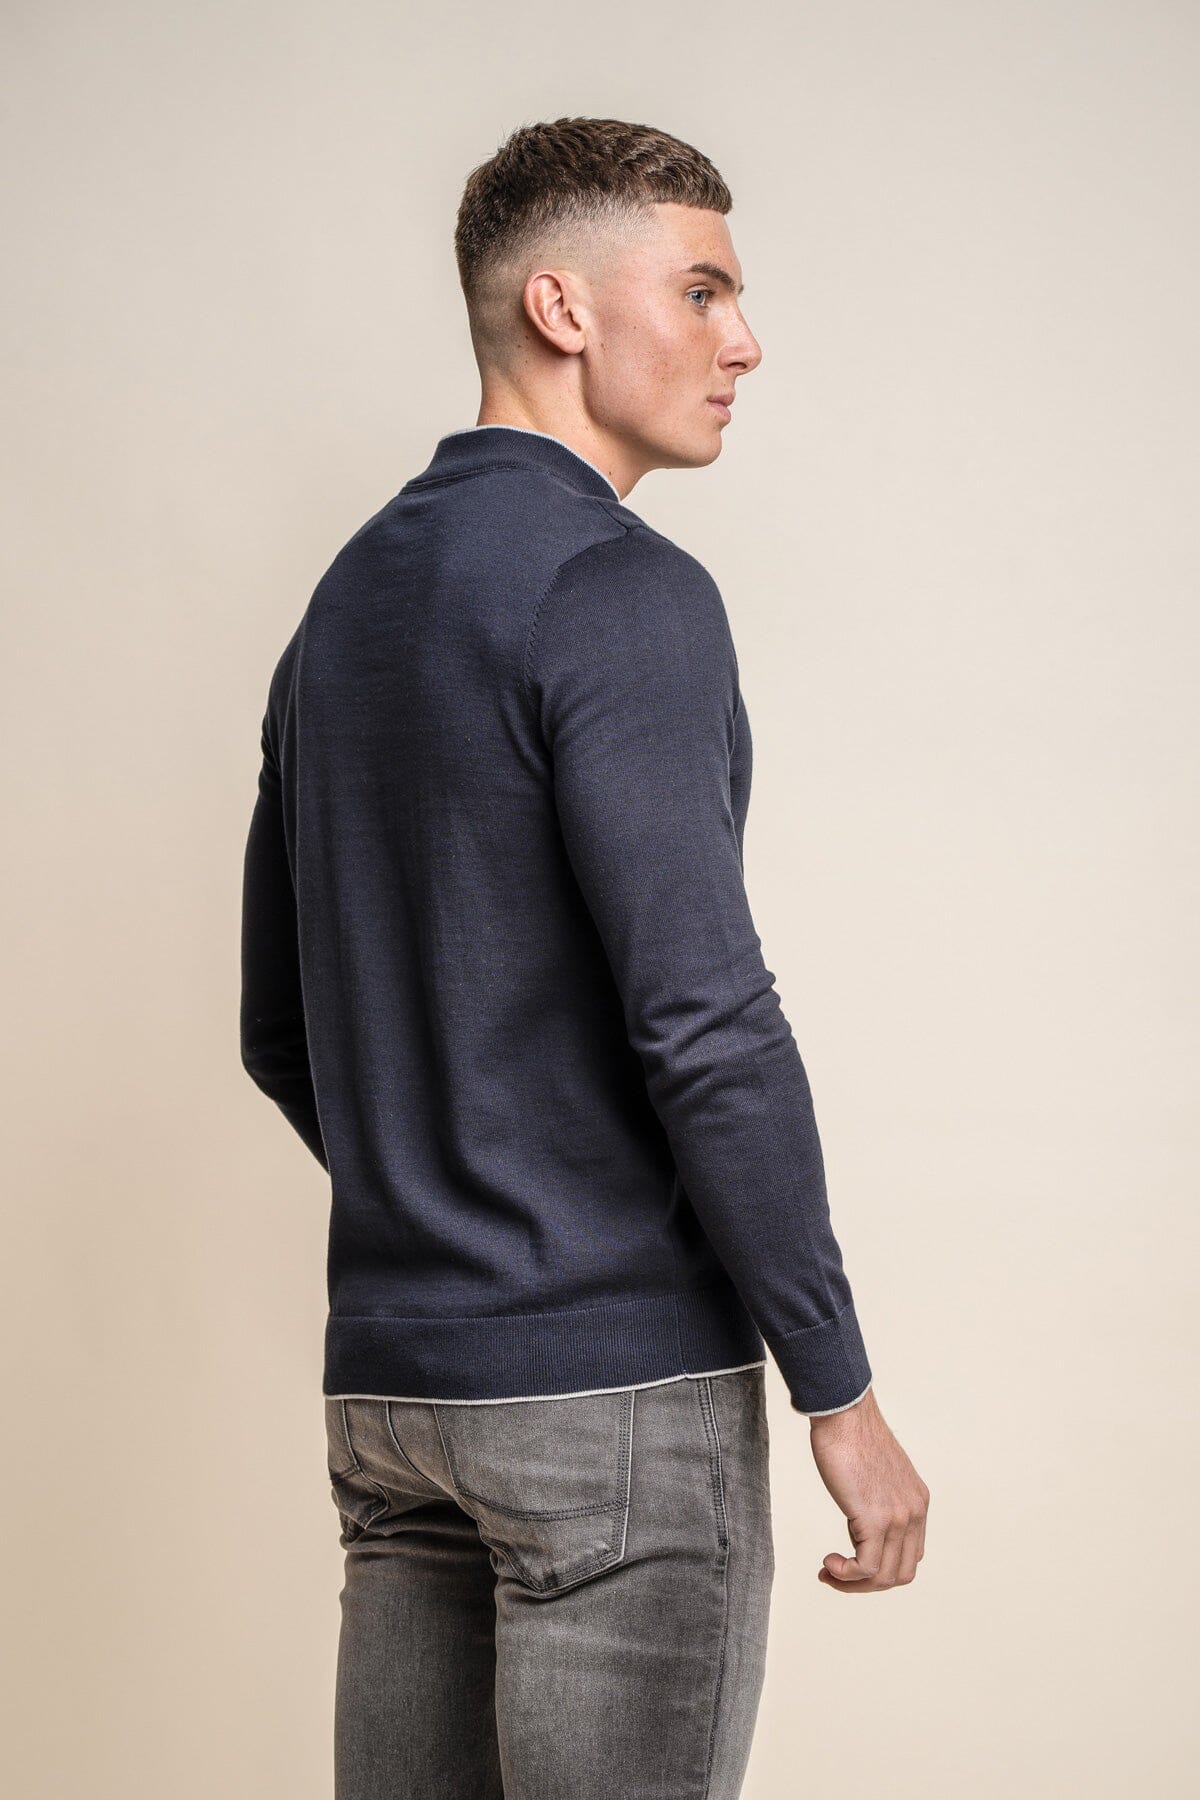 Rio Navy Turtle Neck Jumper - Jumpers - 